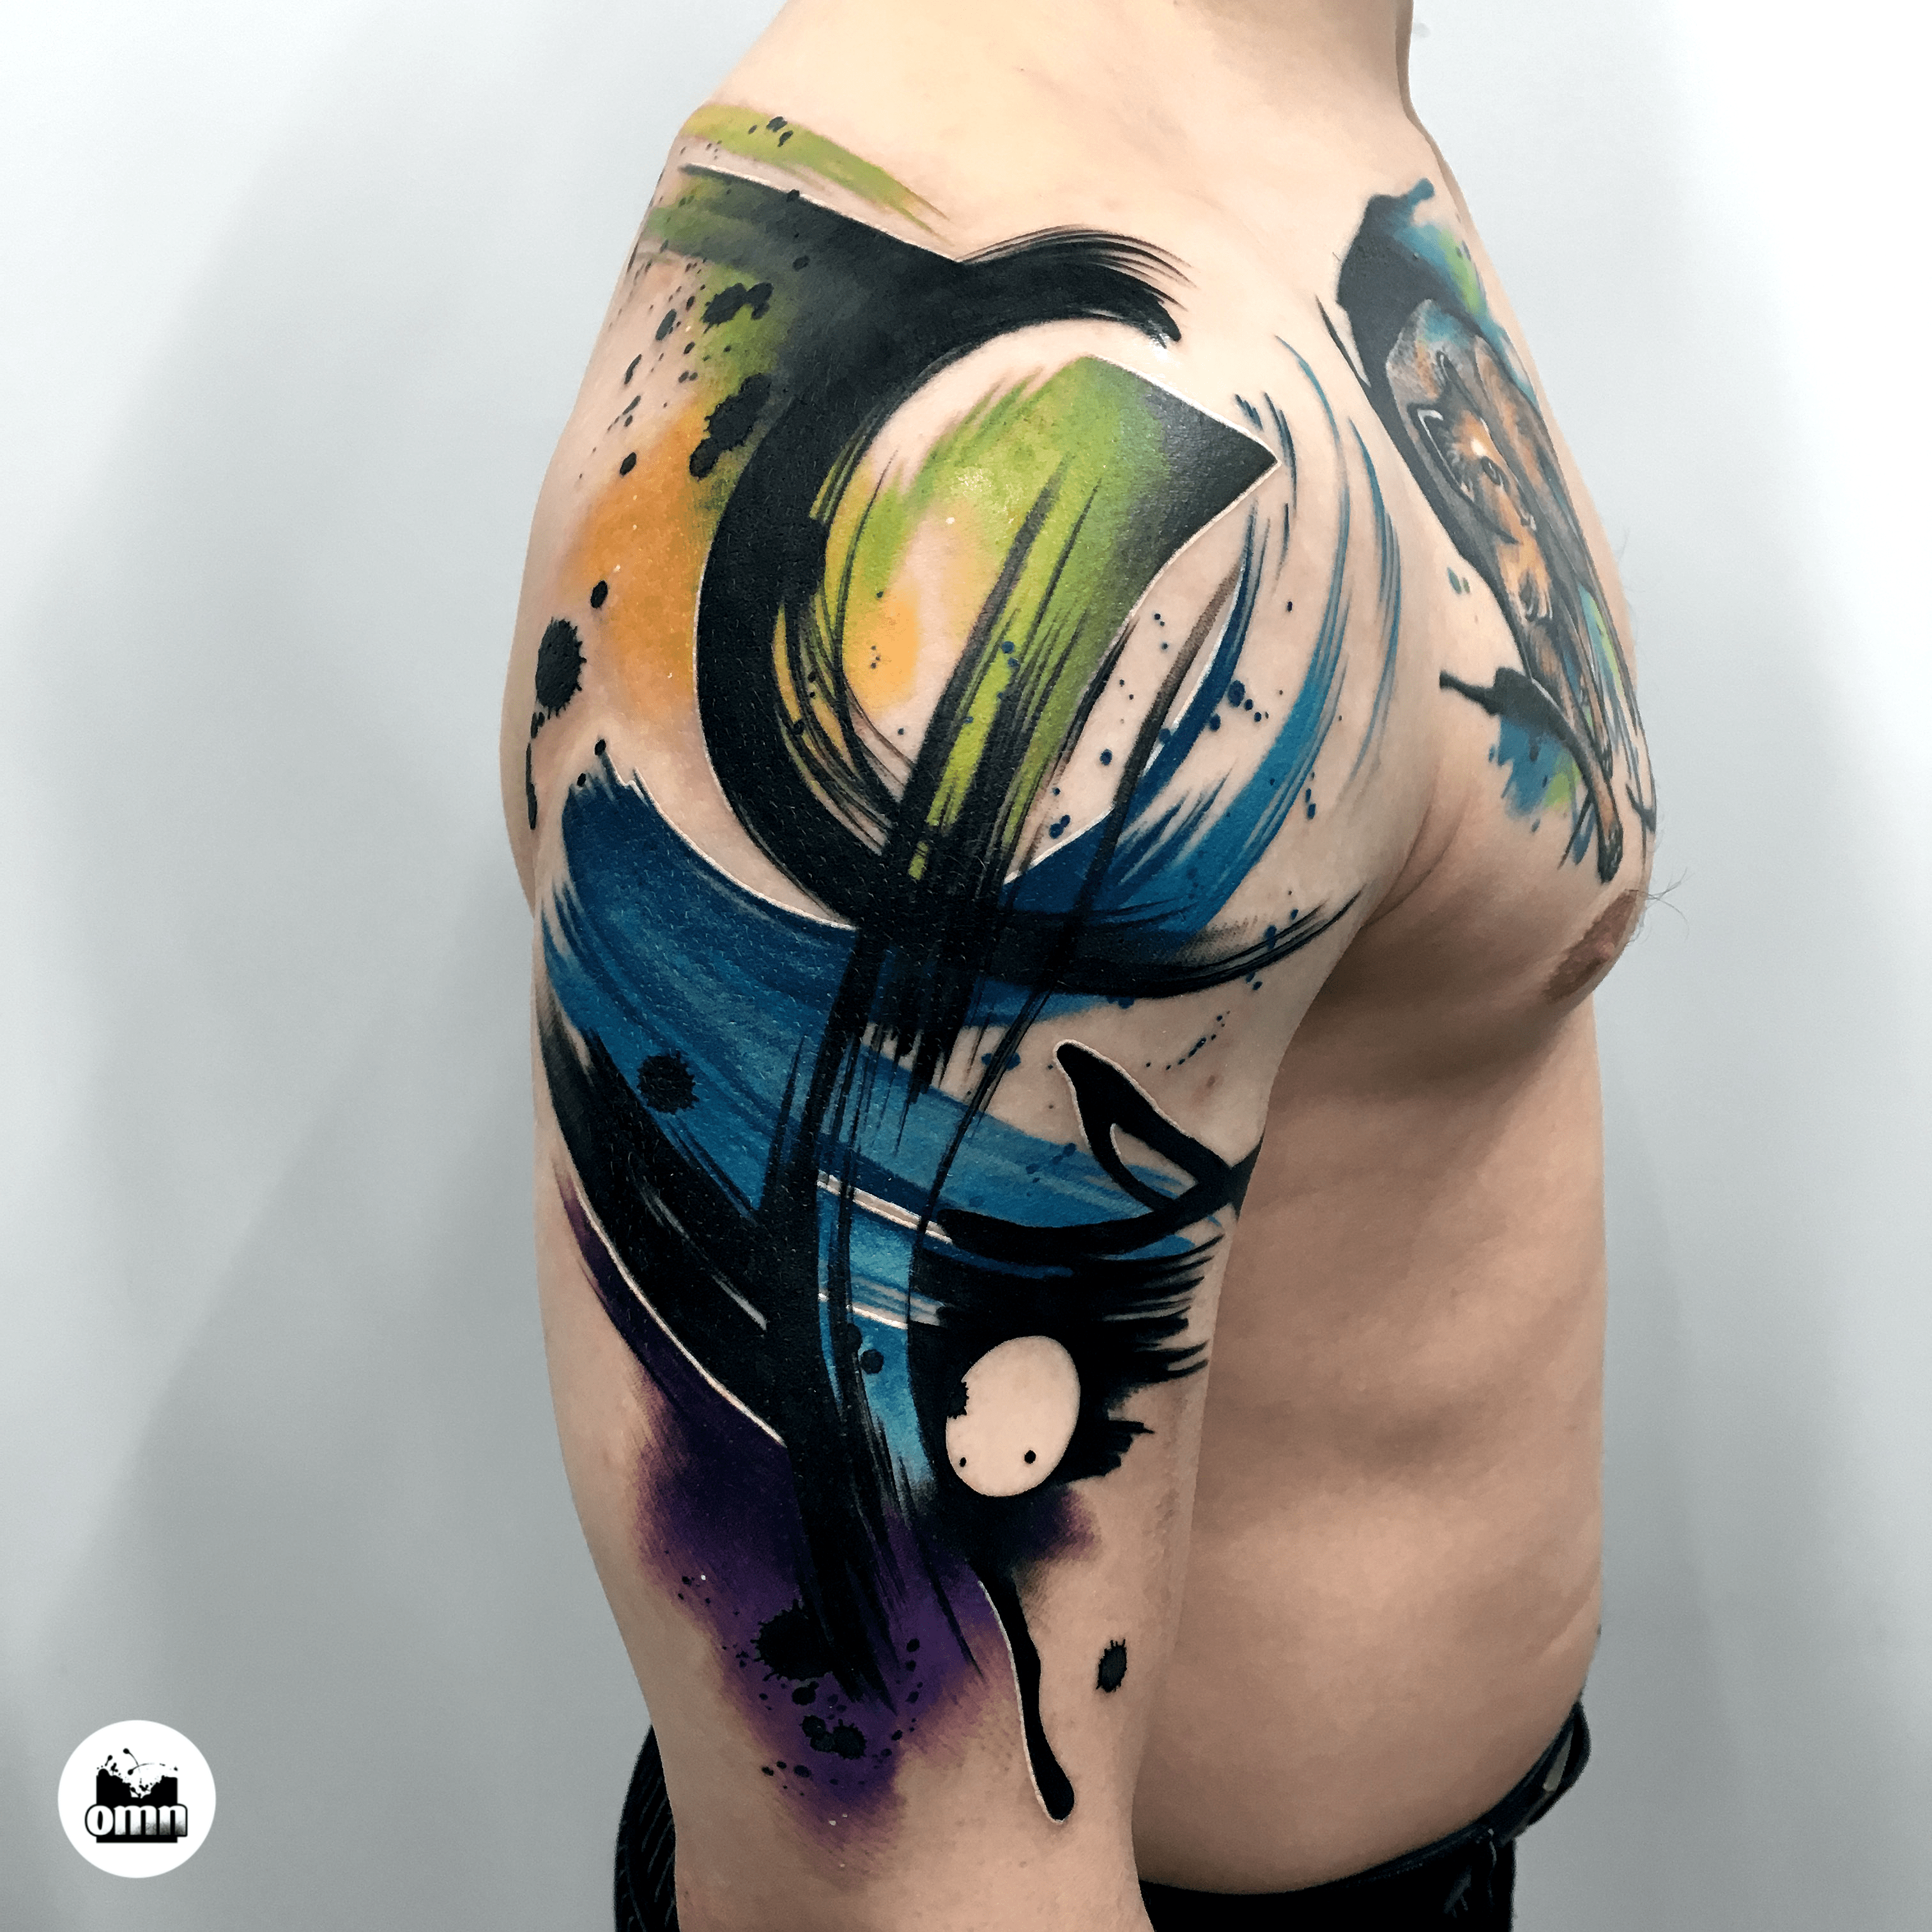 The Cool-Color Abstract Painting Tattoo Ideas